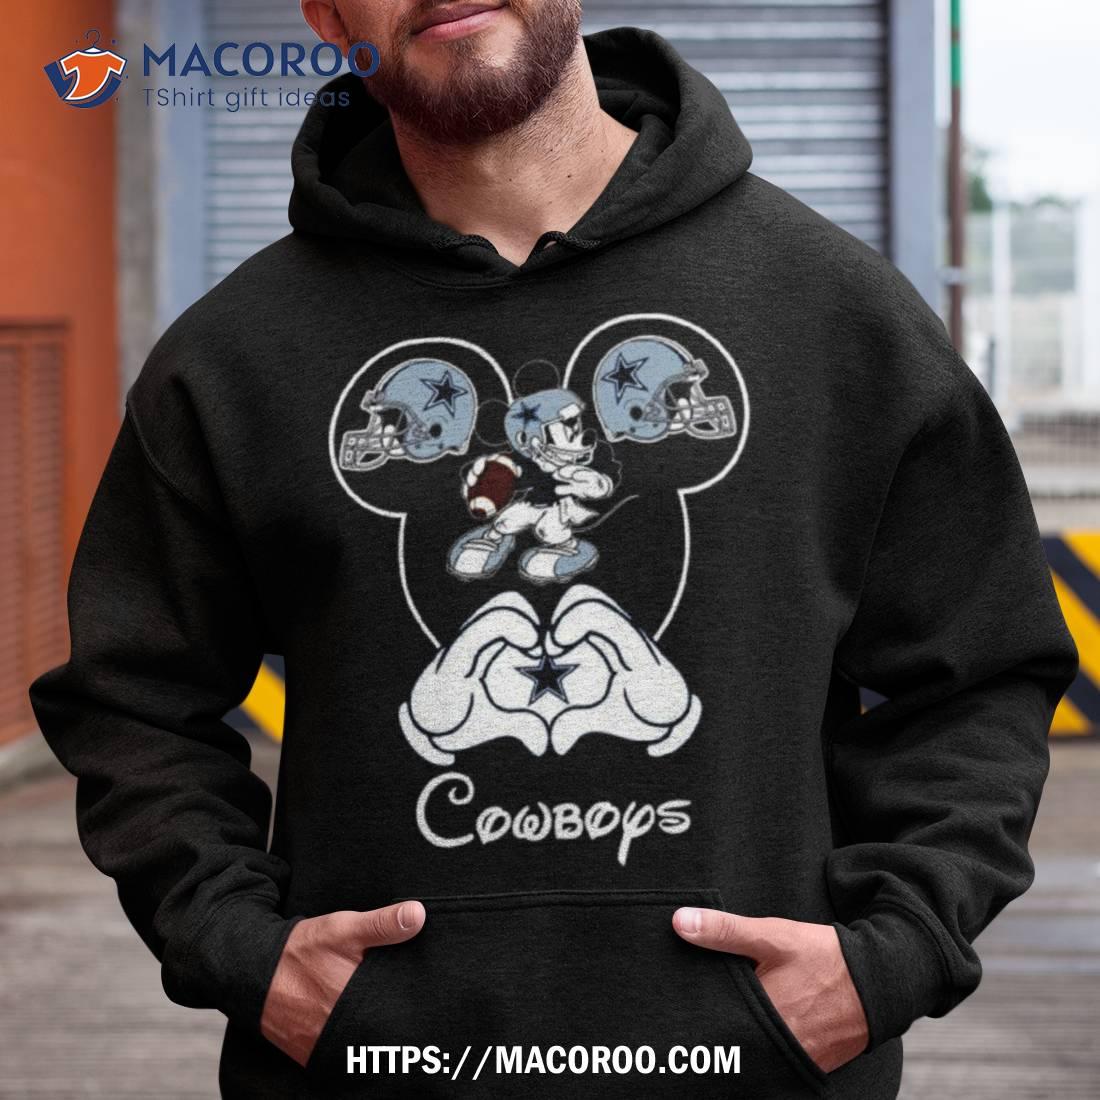 https://images.macoroo.com/wp-content/uploads/2023/10/disney-mickey-mouse-love-dallas-cowboys-2023-t-shirt-hoodie.jpg